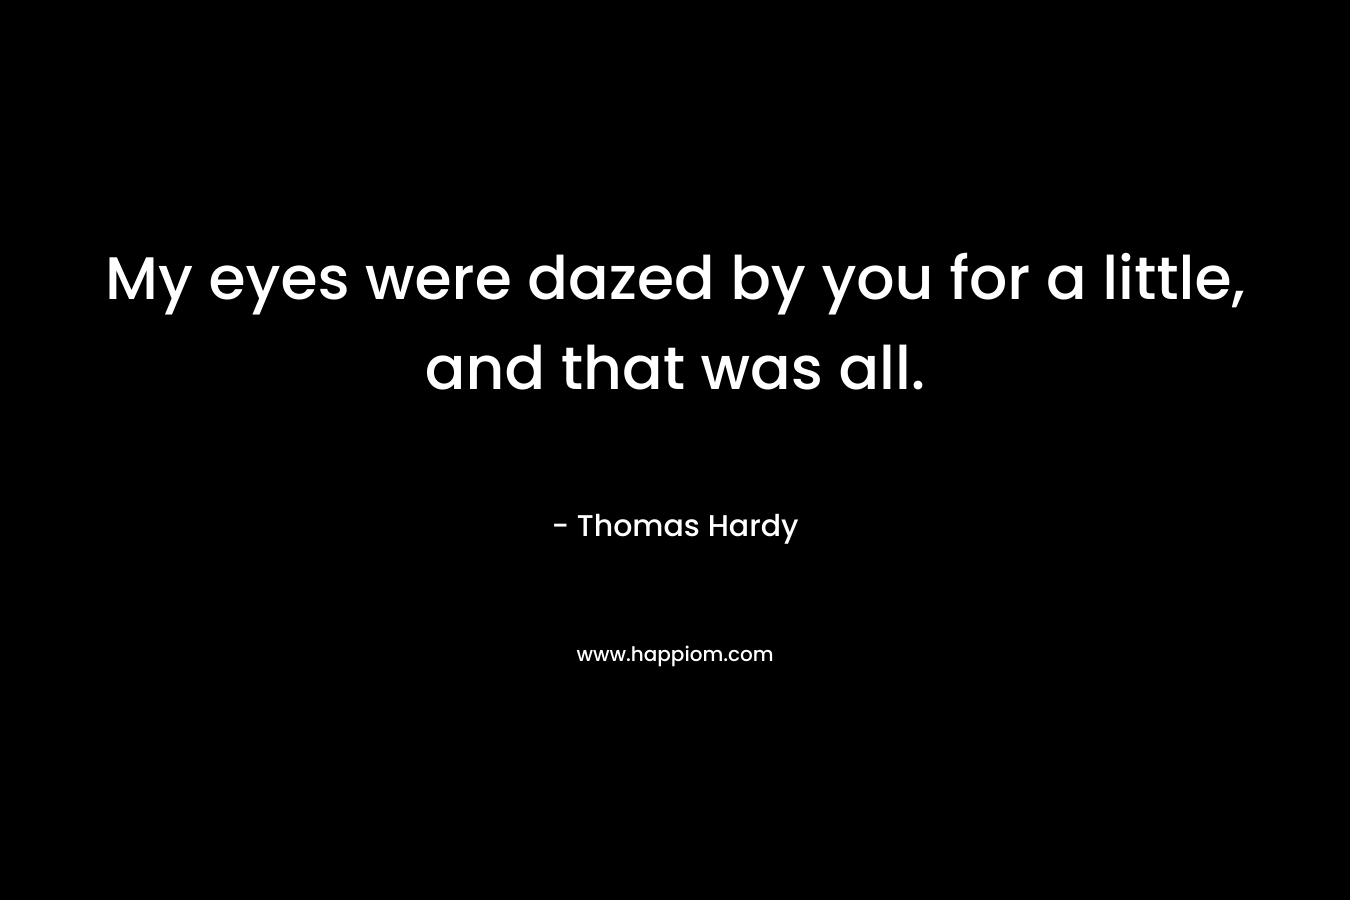 My eyes were dazed by you for a little, and that was all. – Thomas Hardy